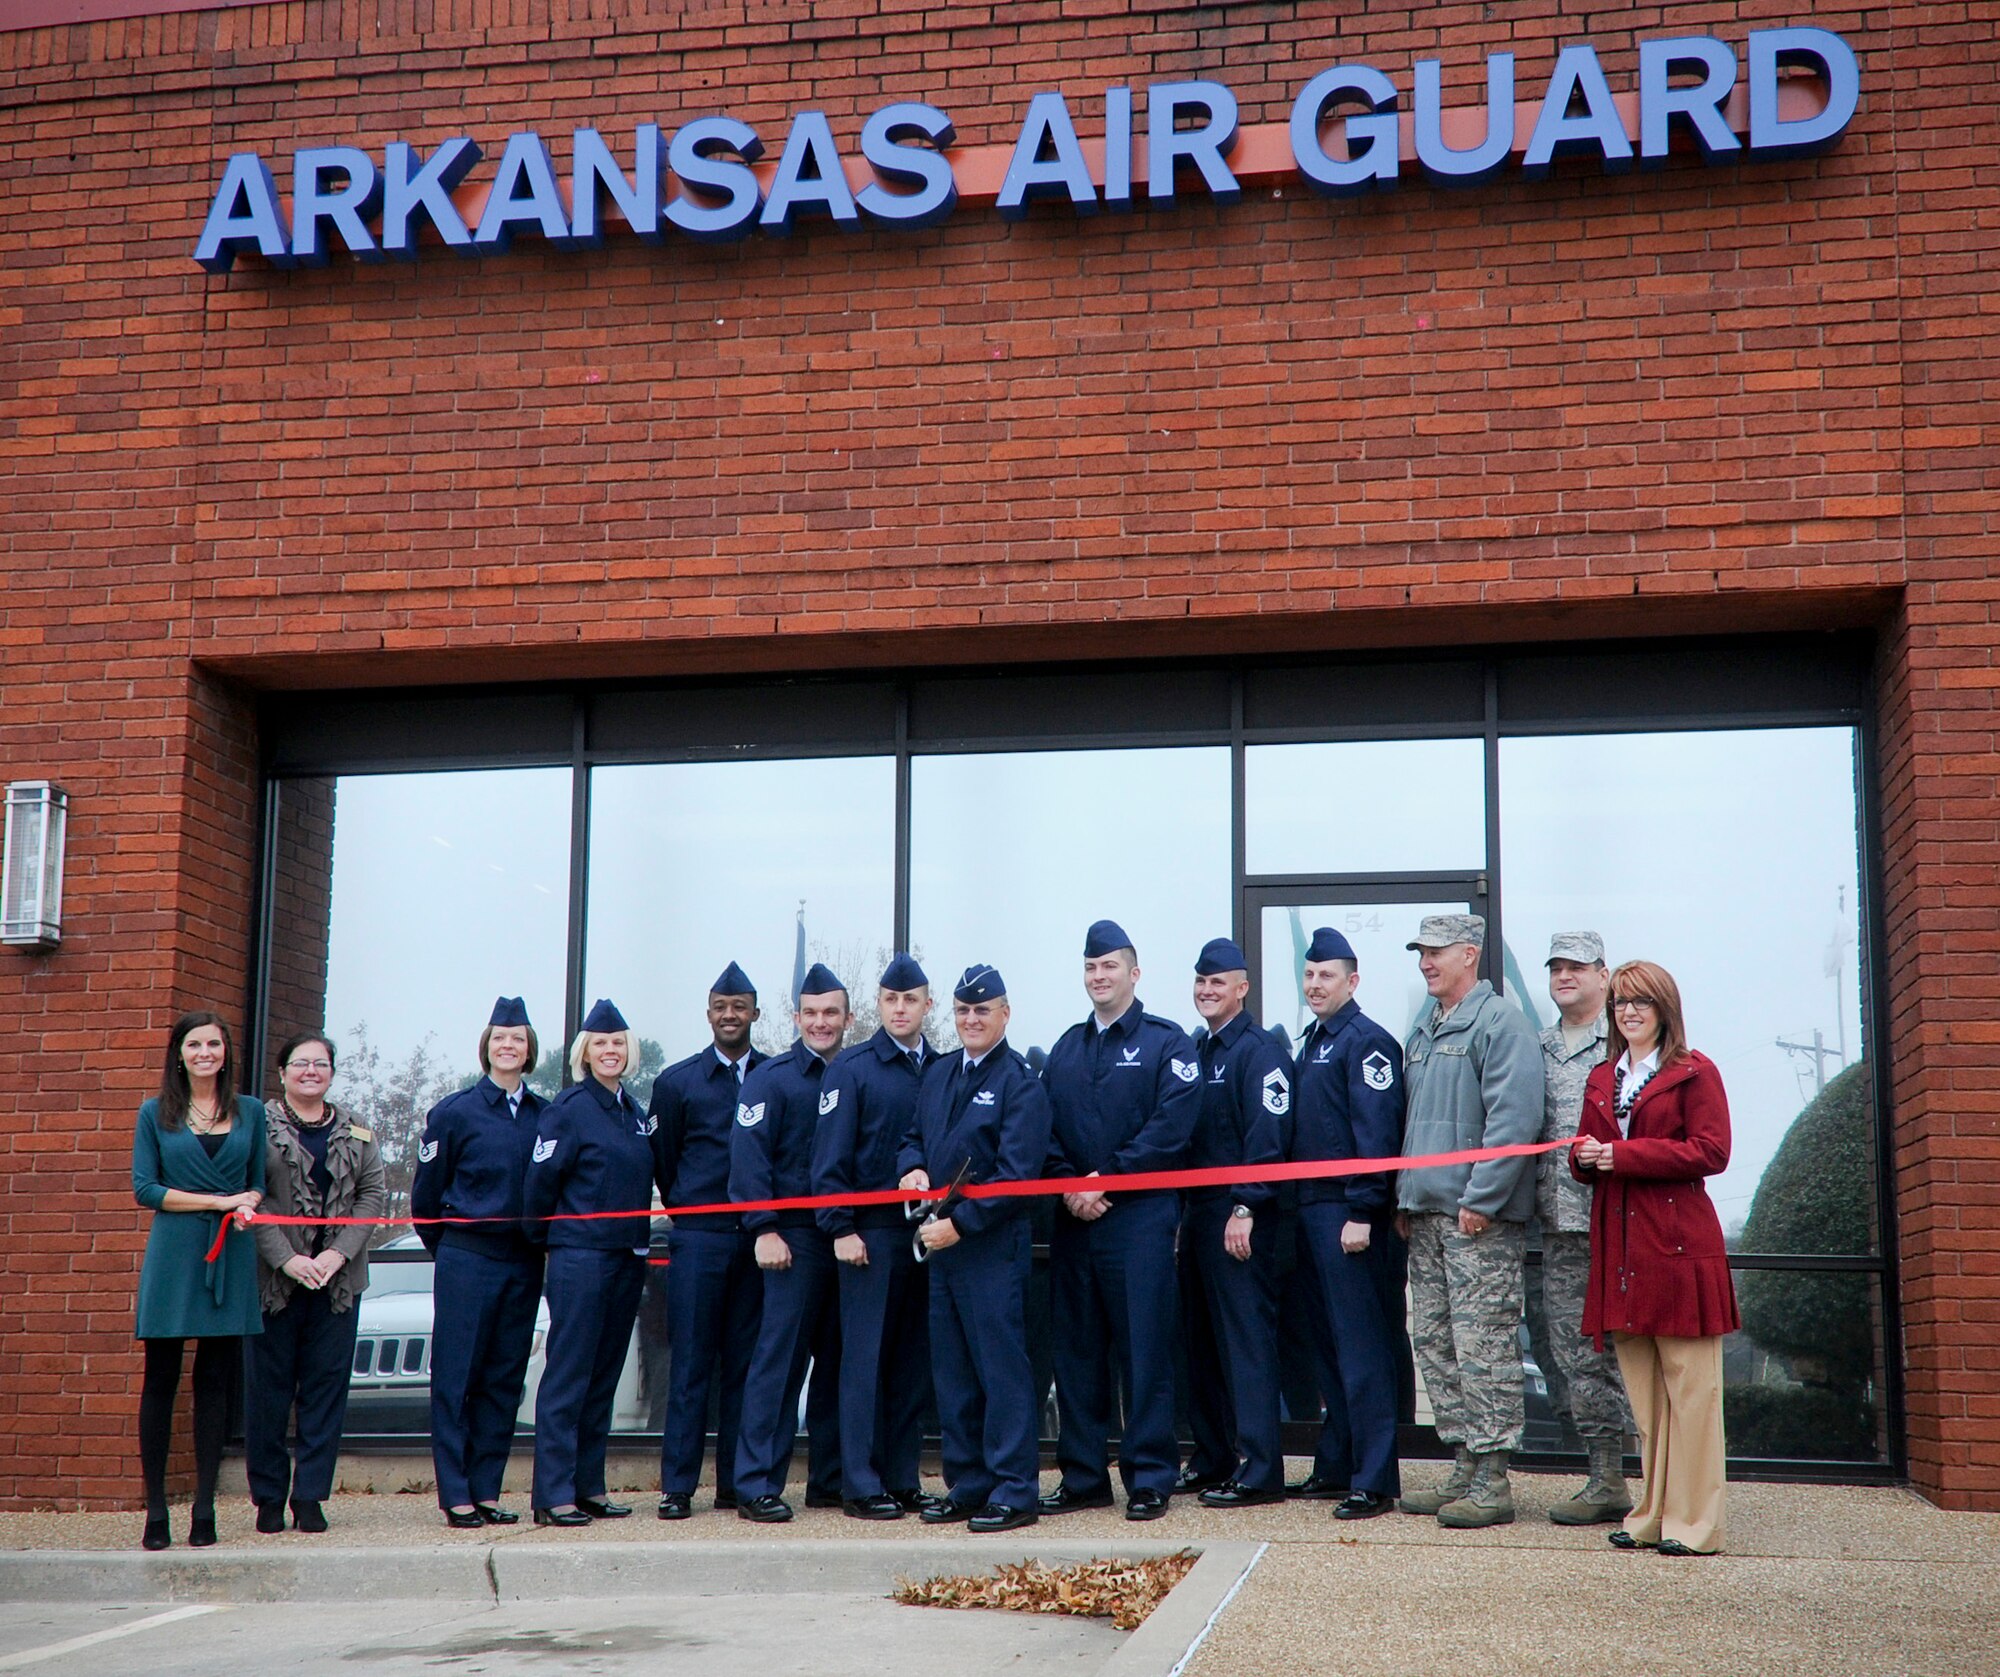 Brig. Gen. Travis D. “Dwight” Balch, chief of staff for the Arkansas Air National Guard, cuts the ceremonial ribbon Dec. 4, 2014, at the grand opening ceremony for the new Arkansas Air National Guard recruiting storefront at Green Point Shopping Center in Fort Smith, Ark. Air National Guard recruiting and retention representatives from locations in Little Rock, Fayetteville and Fort Smith, Ark. joined members of the Fort Smith Chamber of Commerce to commemorate the first off-base recruiting office in the 188th Wing’s history. (U.S. Air National Guard photo by Staff Sgt. Hannah Dickerson/released)